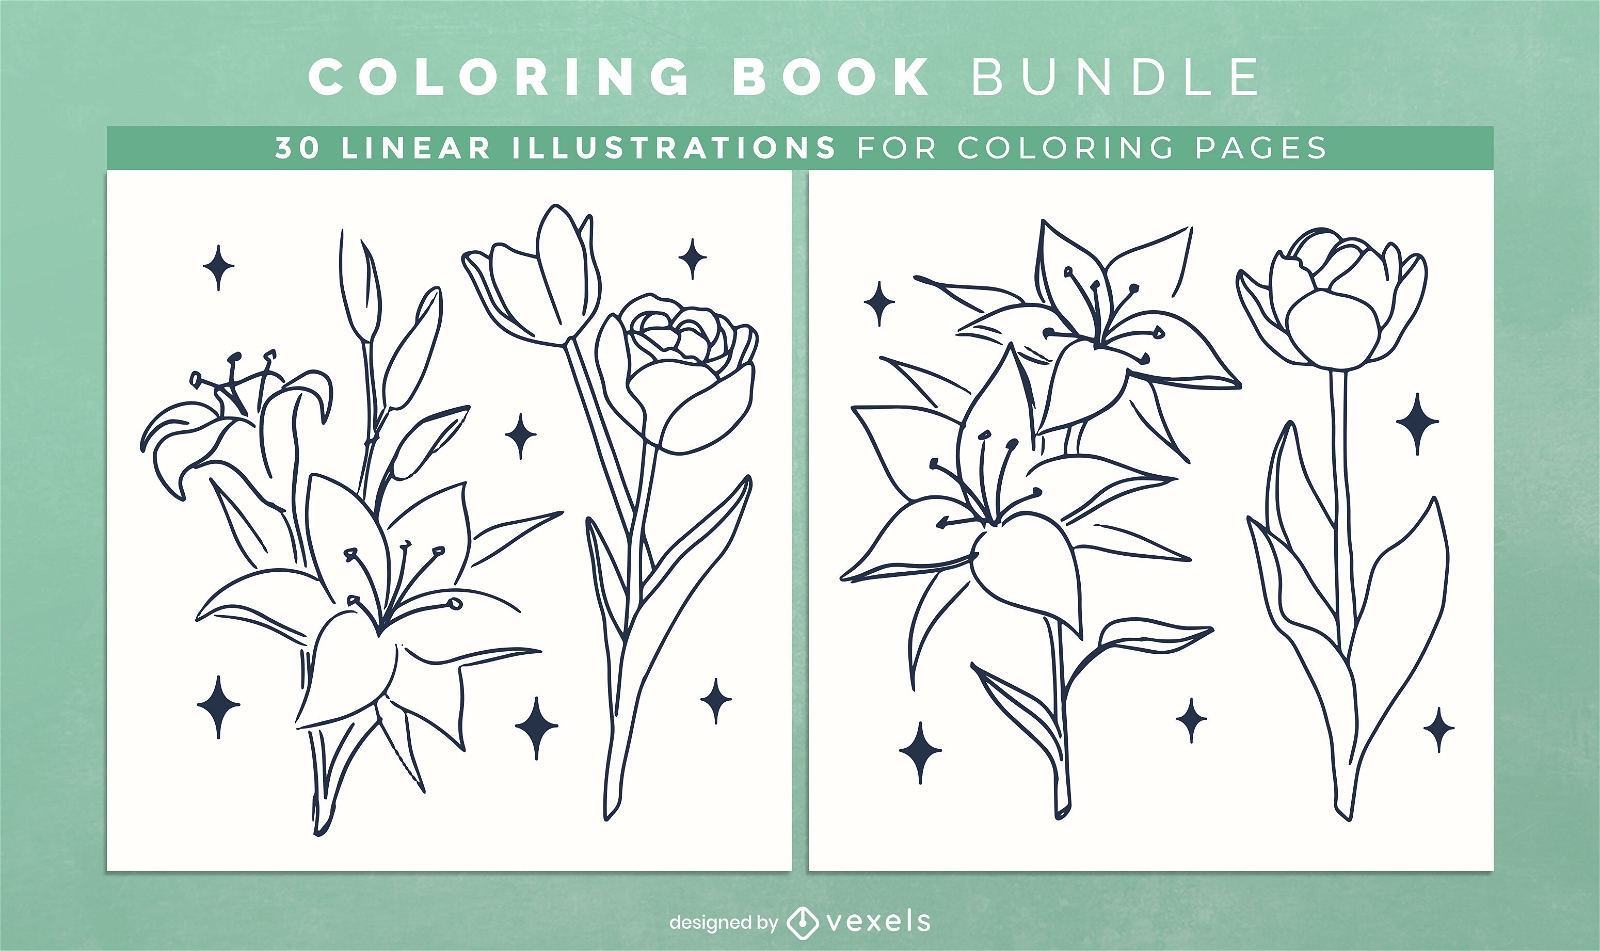 Botnical wildflowers coloring book pages design